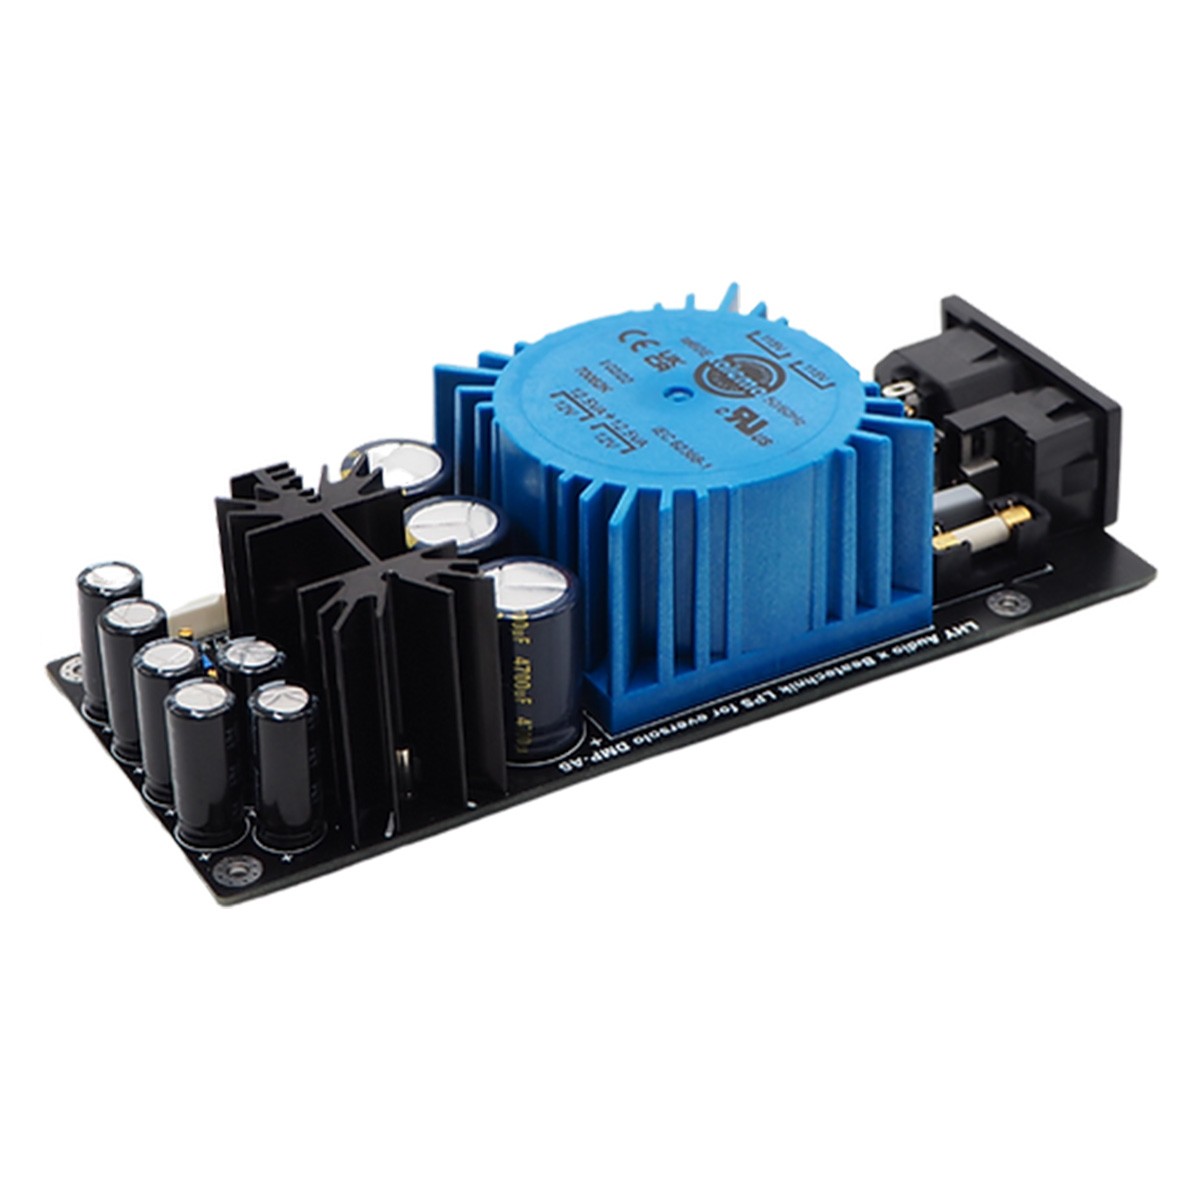 BEATECHNIK x LHY AUDIO LPS-A6 220V Linear Power Supply Module for EverSolo DMP-A6